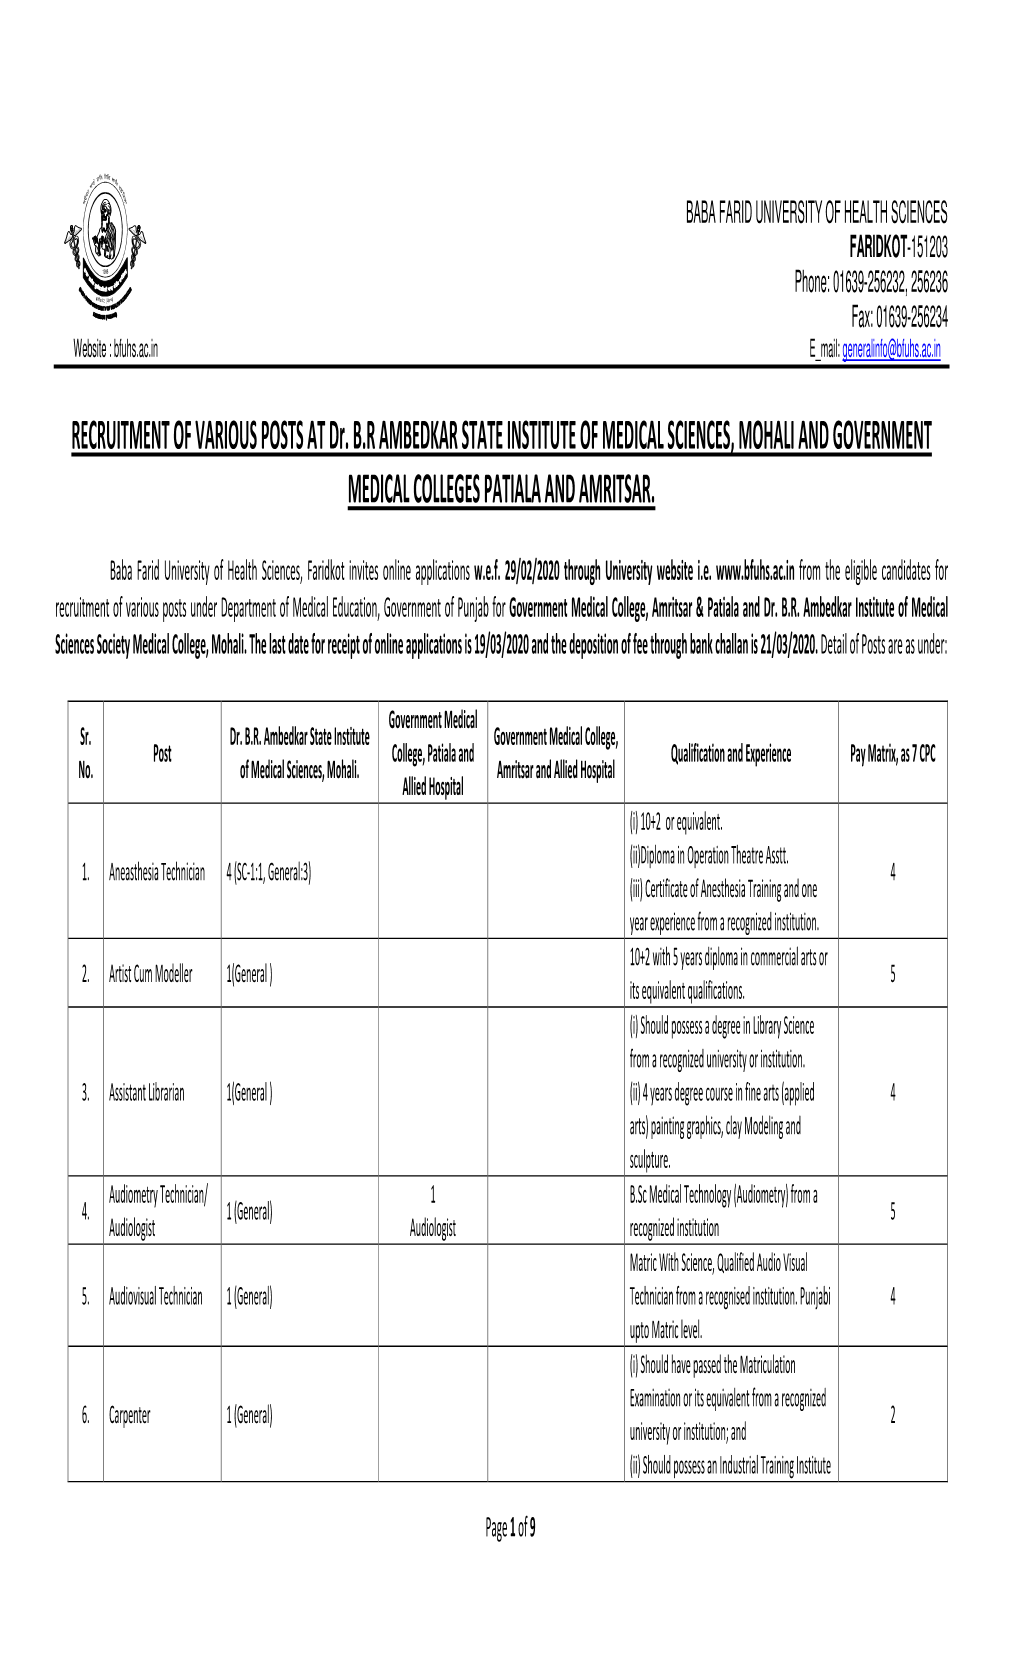 RECRUITMENT of VARIOUS POSTS at Dr. B.R AMBEDKAR STATE INSTITUTE of MEDICAL SCIENCES, MOHALI and GOVERNMENT MEDICAL COLLEGES PATIALA and AMRITSAR